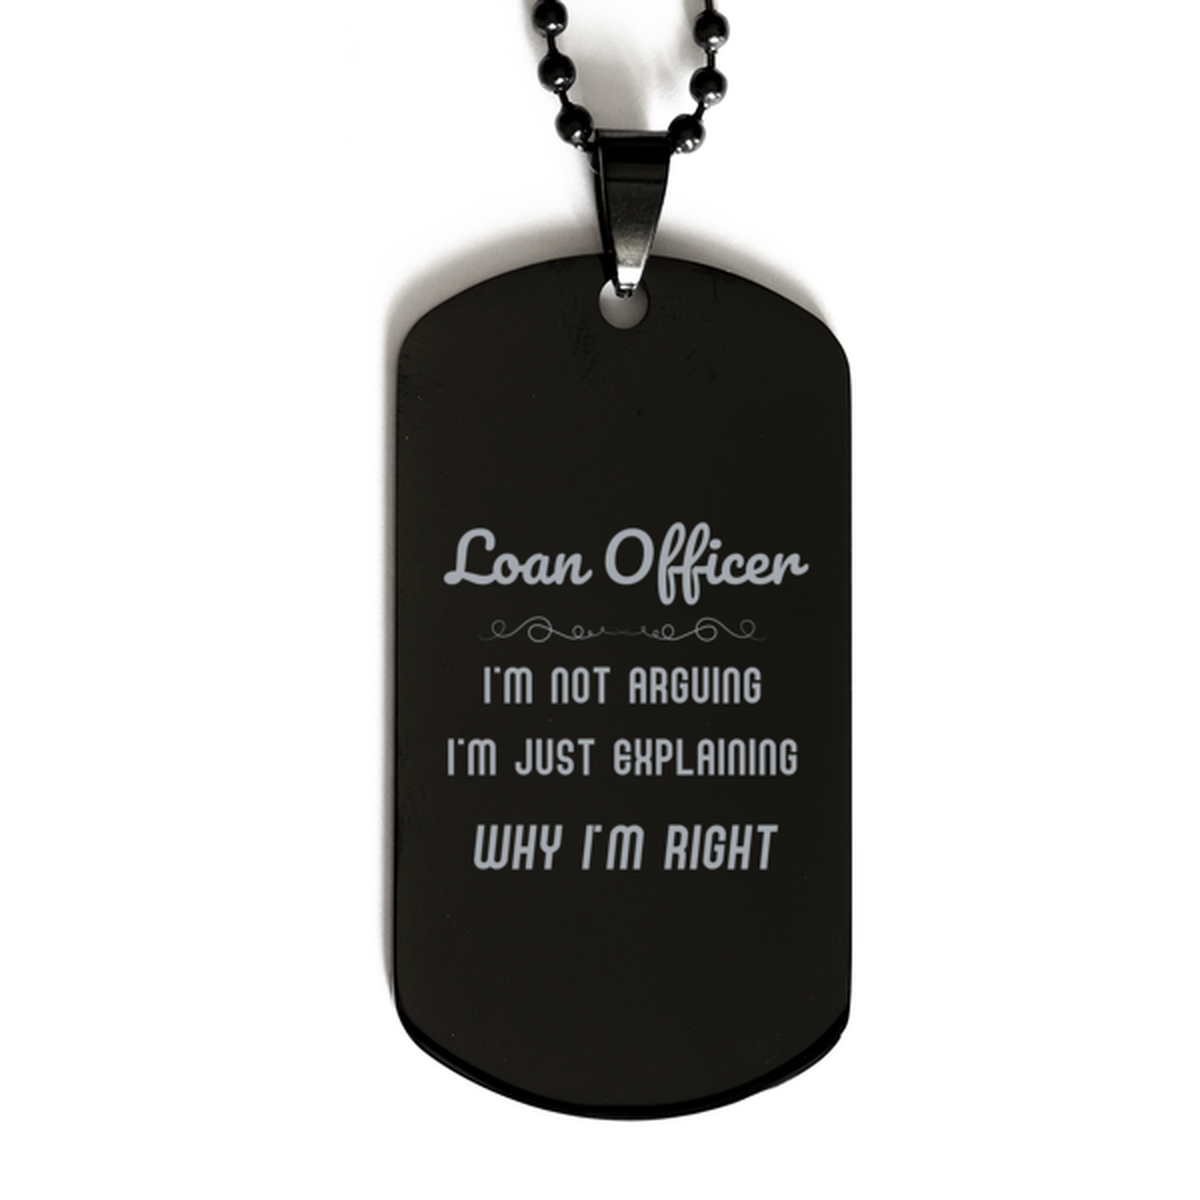 Loan Officer I'm not Arguing. I'm Just Explaining Why I'm RIGHT Black Dog Tag, Funny Saying Quote Loan Officer Gifts For Loan Officer Graduation Birthday Christmas Gifts for Men Women Coworker